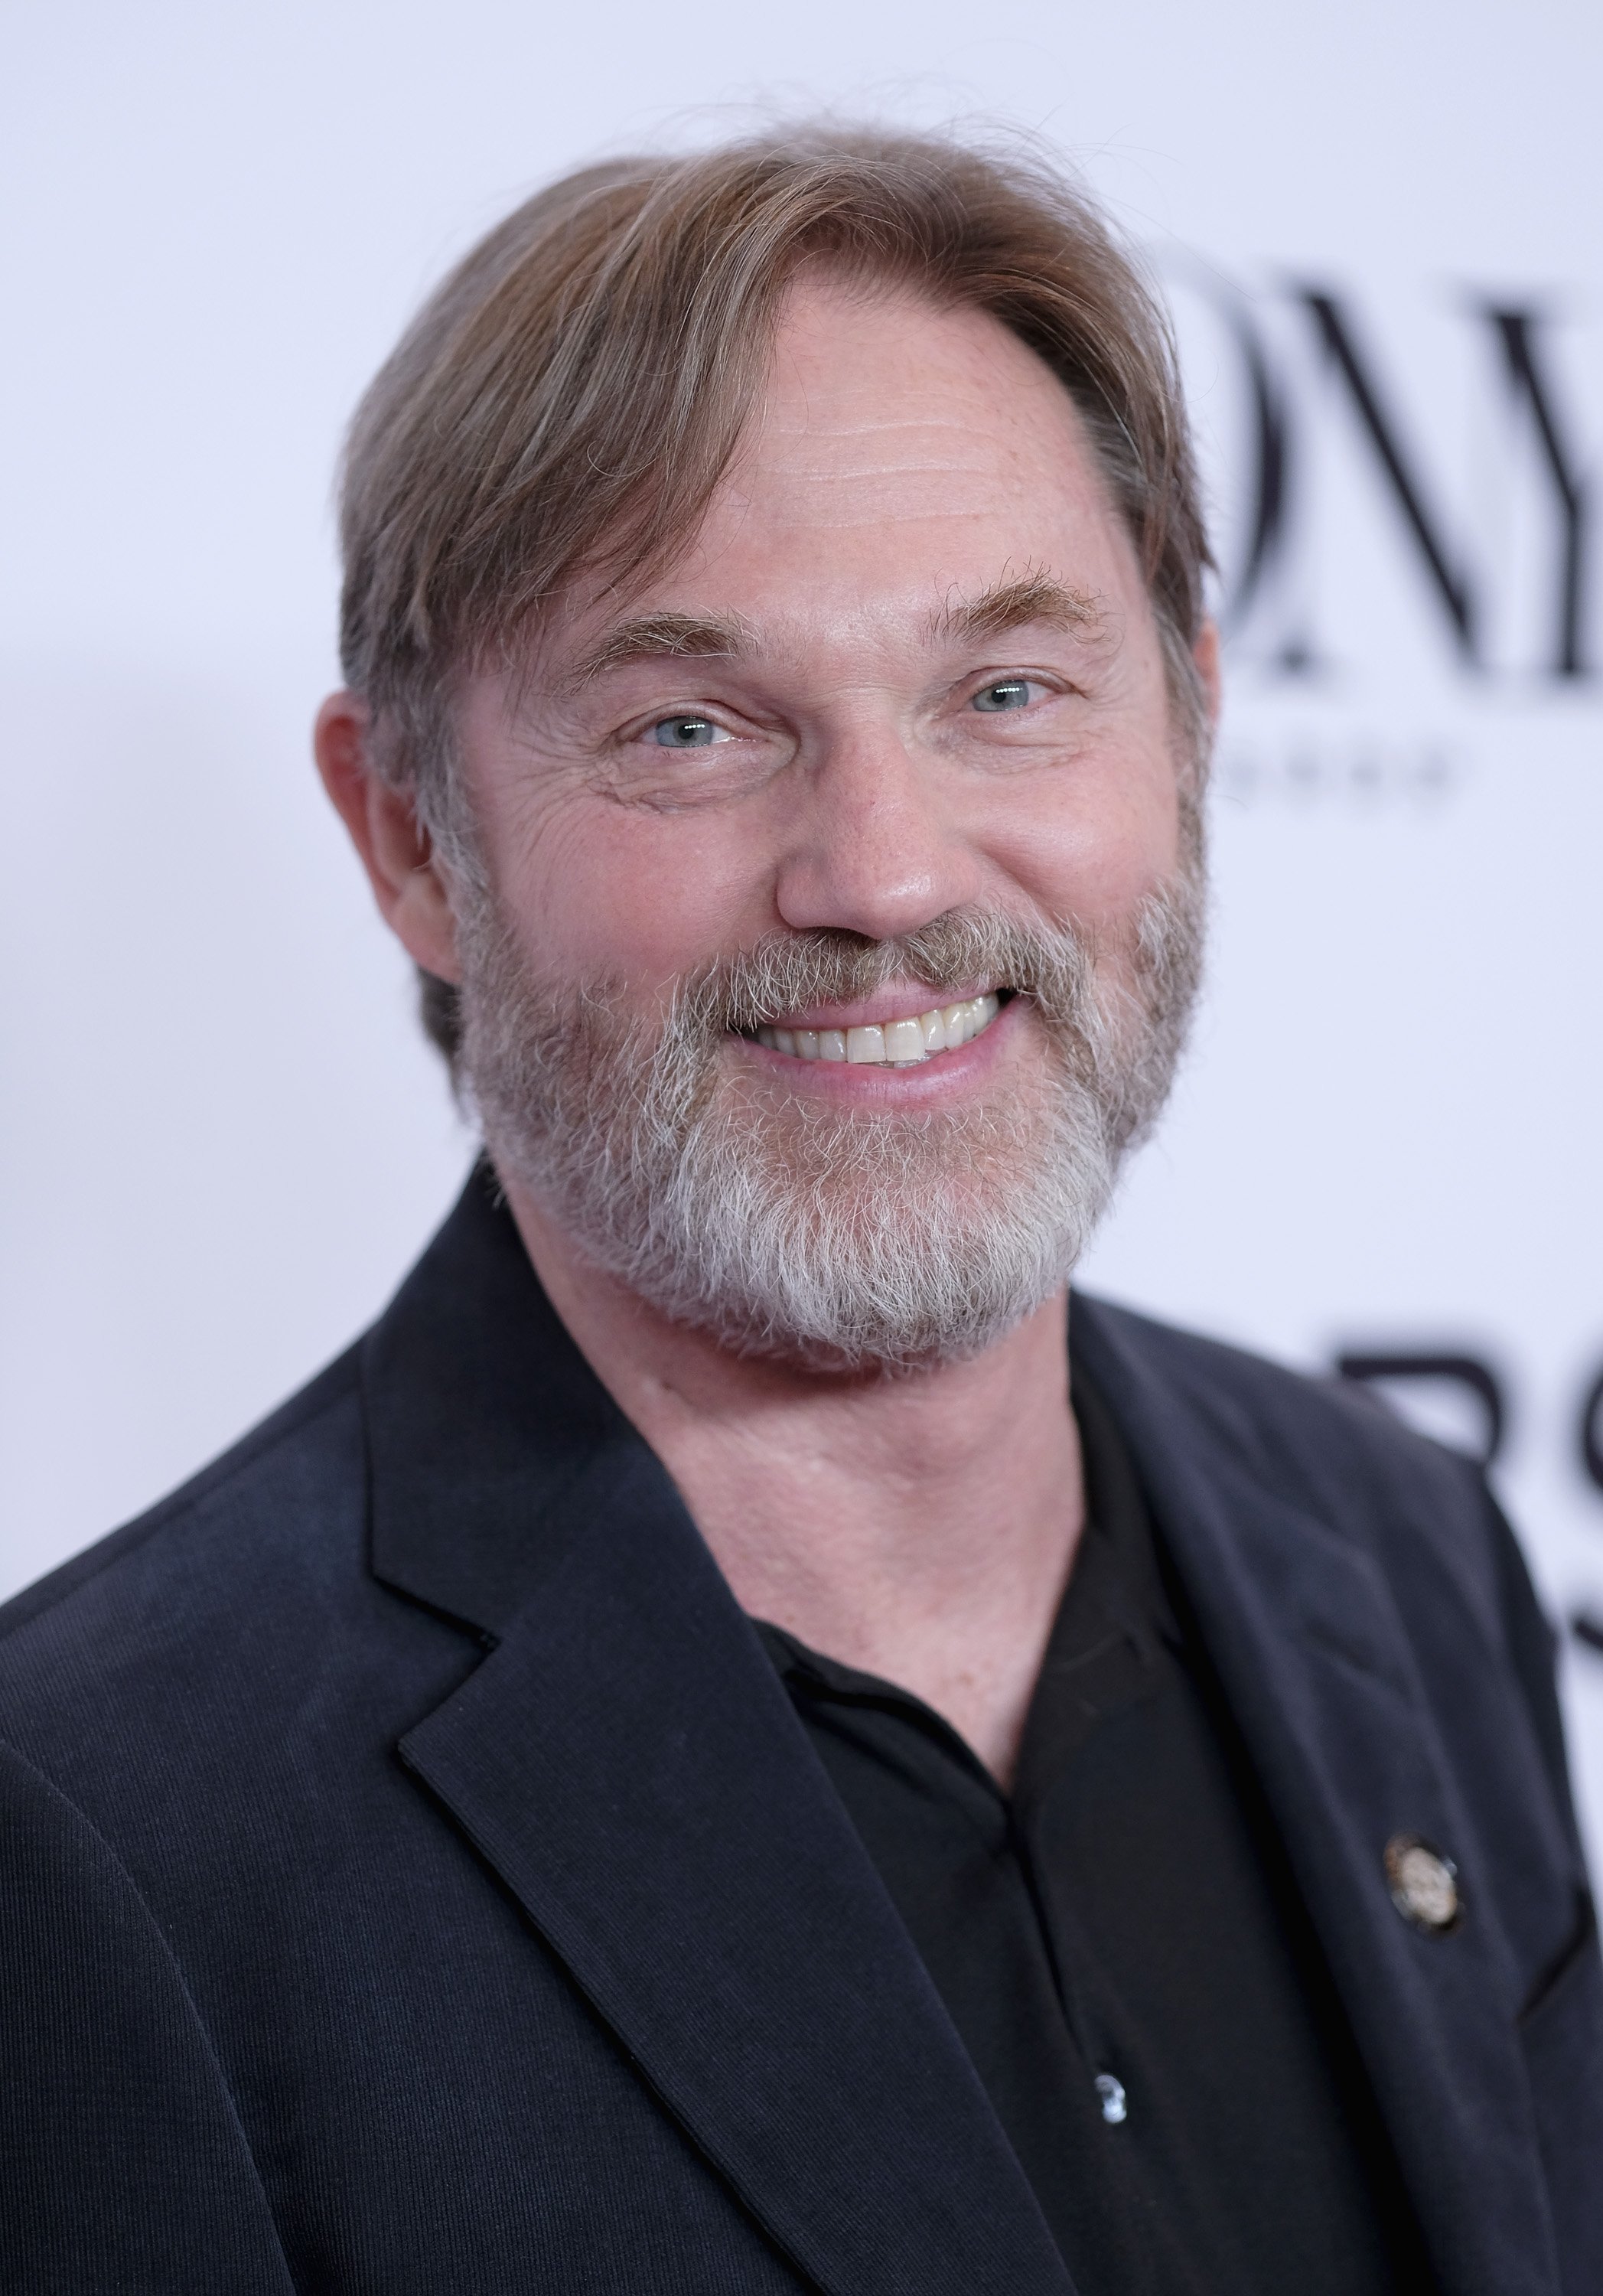 Richard Thomas at the 2017 Tony Awards Meet The Nominees Press Junket on May 3, 2017 in New York City. | Source: Getty Images